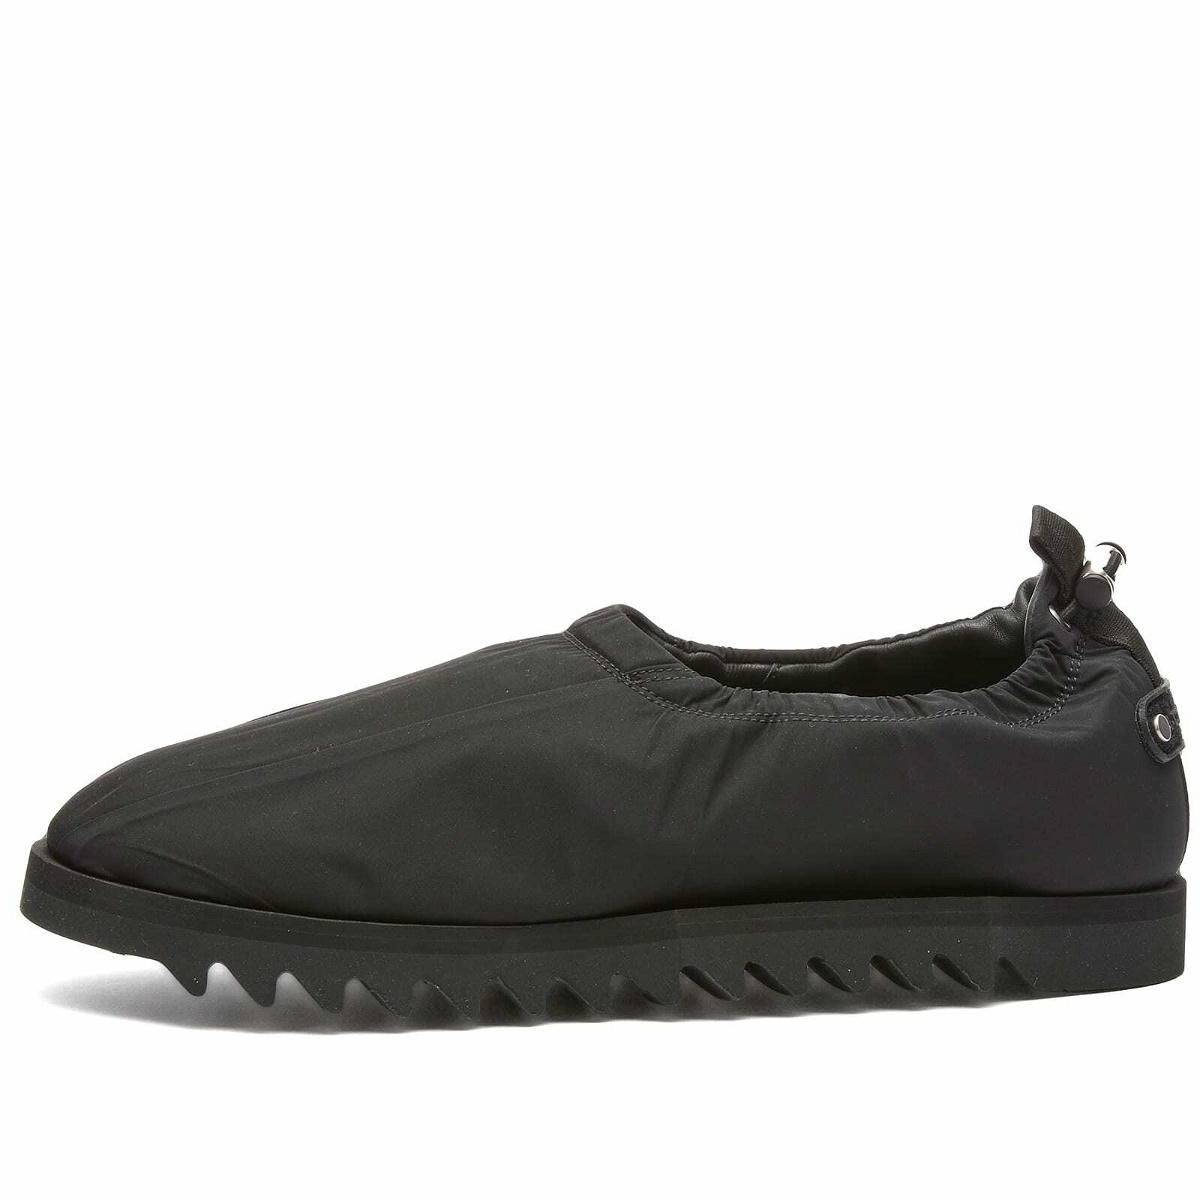 A-COLD-WALL* Men's Nylon Loafers in Black A-Cold-Wall*